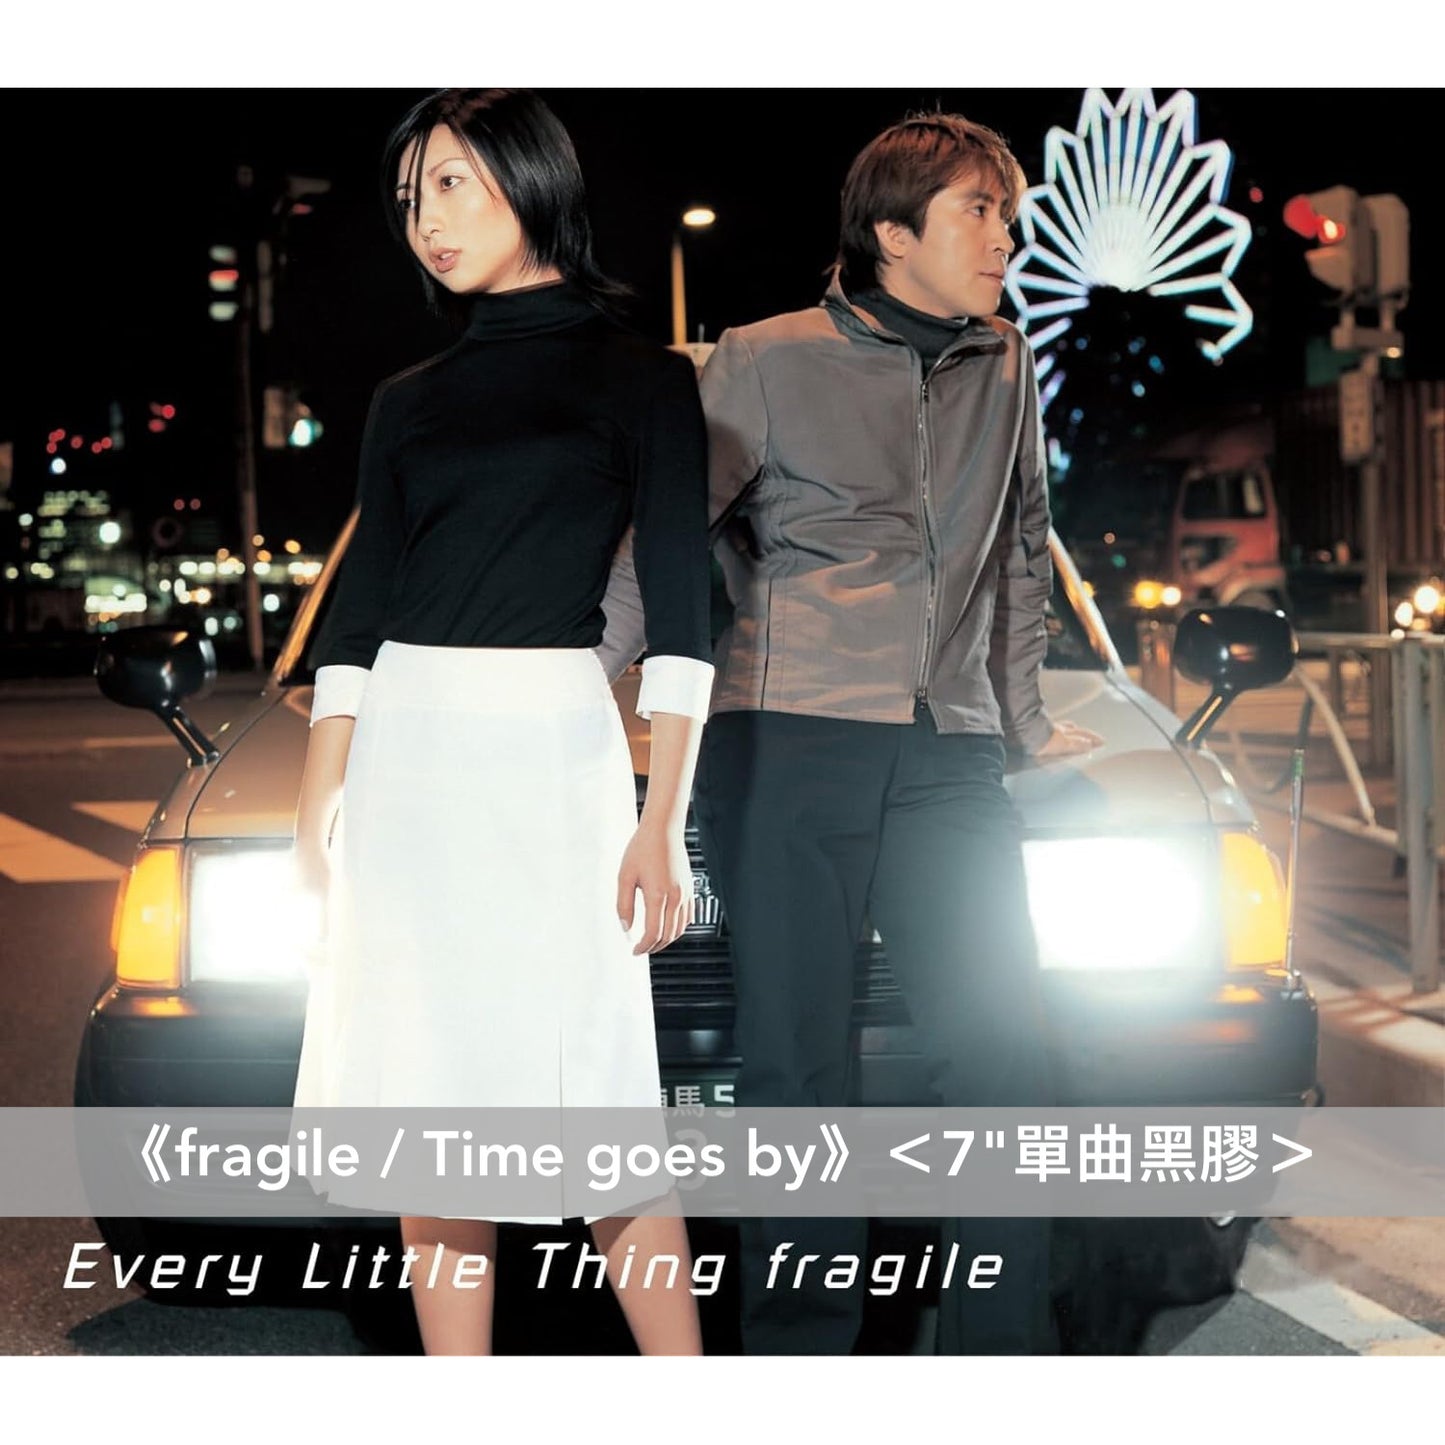 Every Little Thing 單曲黑膠《fragile / Time goes by》＜7"單曲黑膠＞